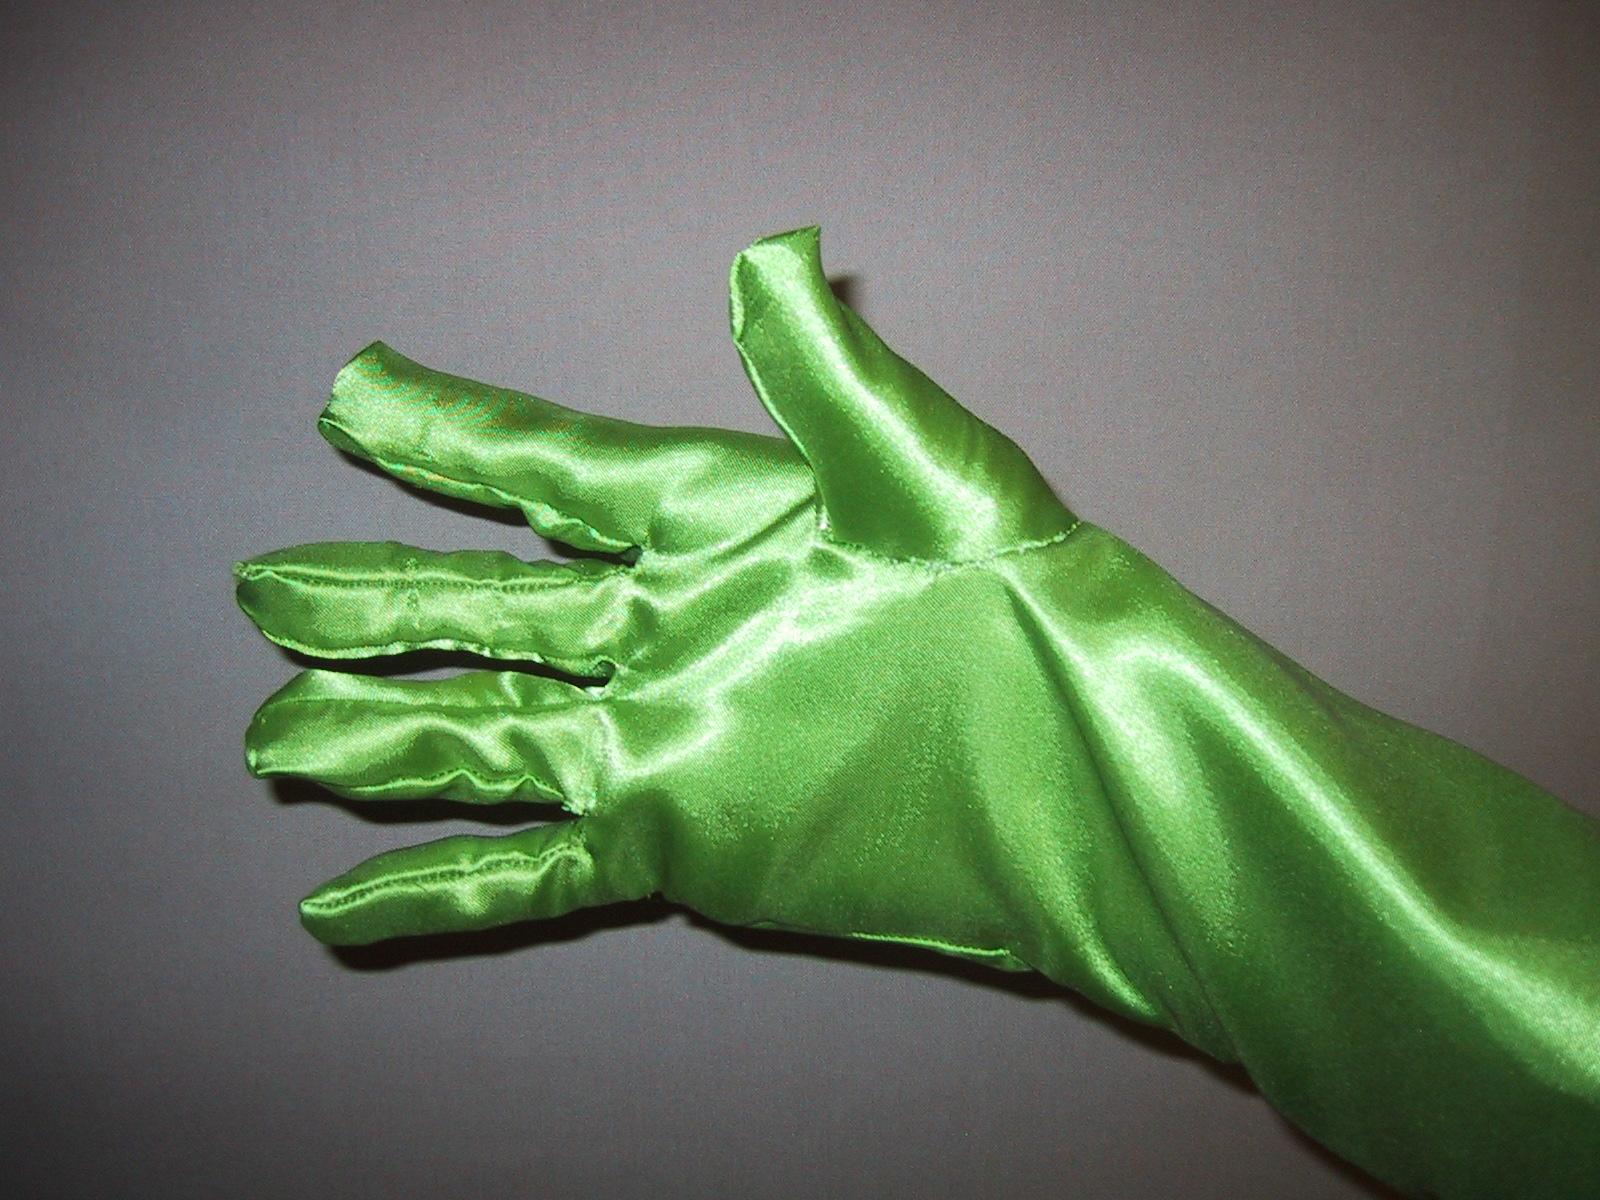 Glove sewn out of green cloth for a mysterio costume